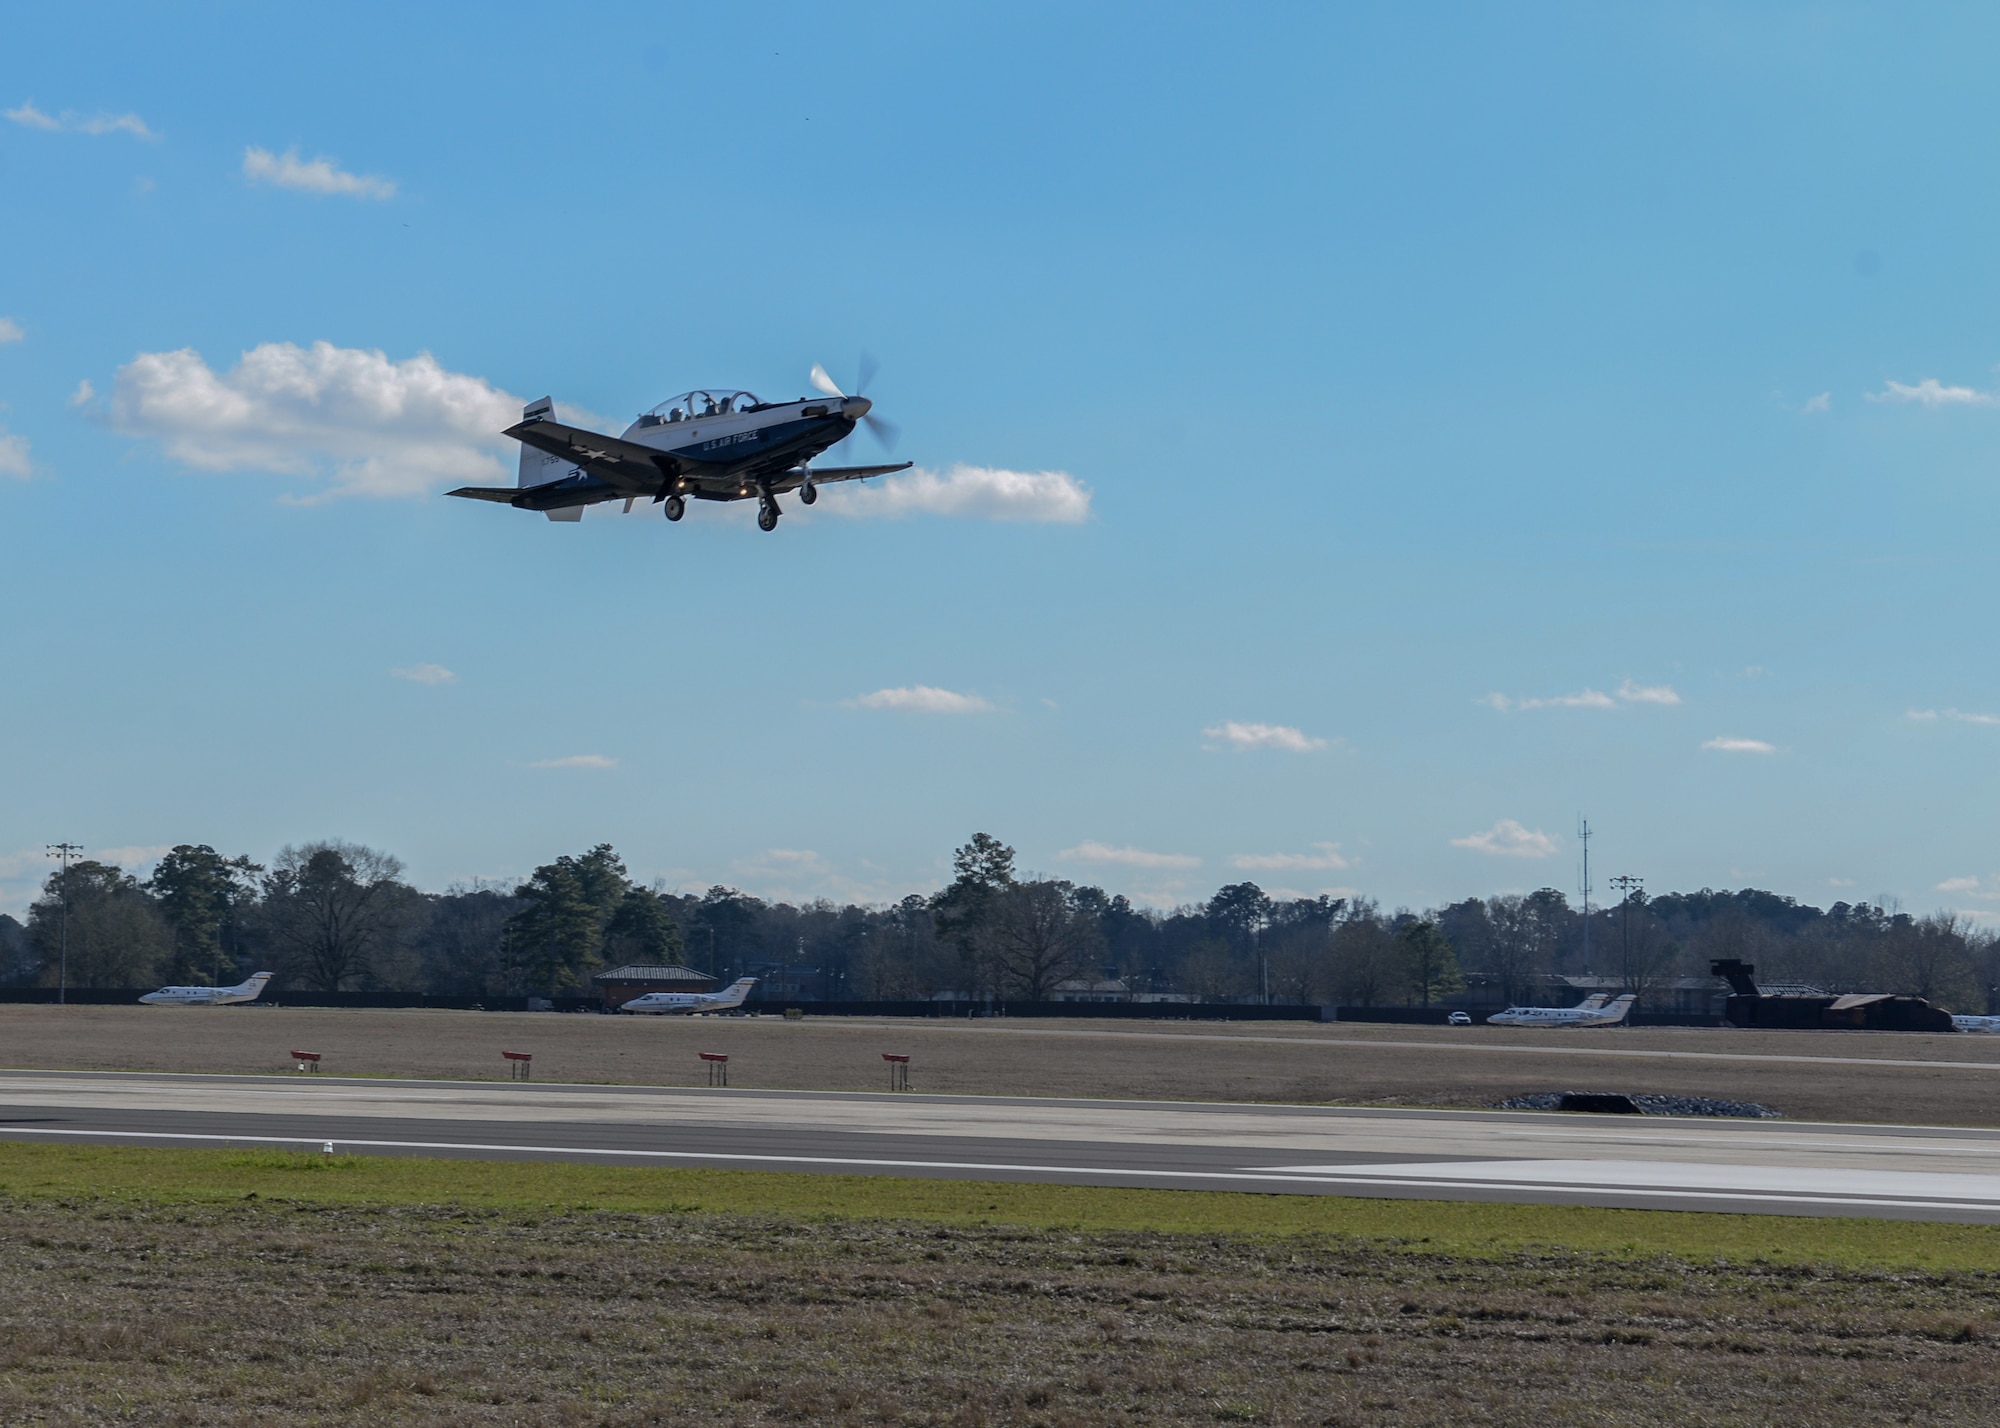 A T-6 Texan II takes off of the flightline with a student pilot and instructor pilot, Jan. 27, 2020, at Columbus Air Force Base, Mississippi. The T-6 can reach a maximum speed of 320 mph. (U.S. Air Force photo by Airman Davis Donaldson)